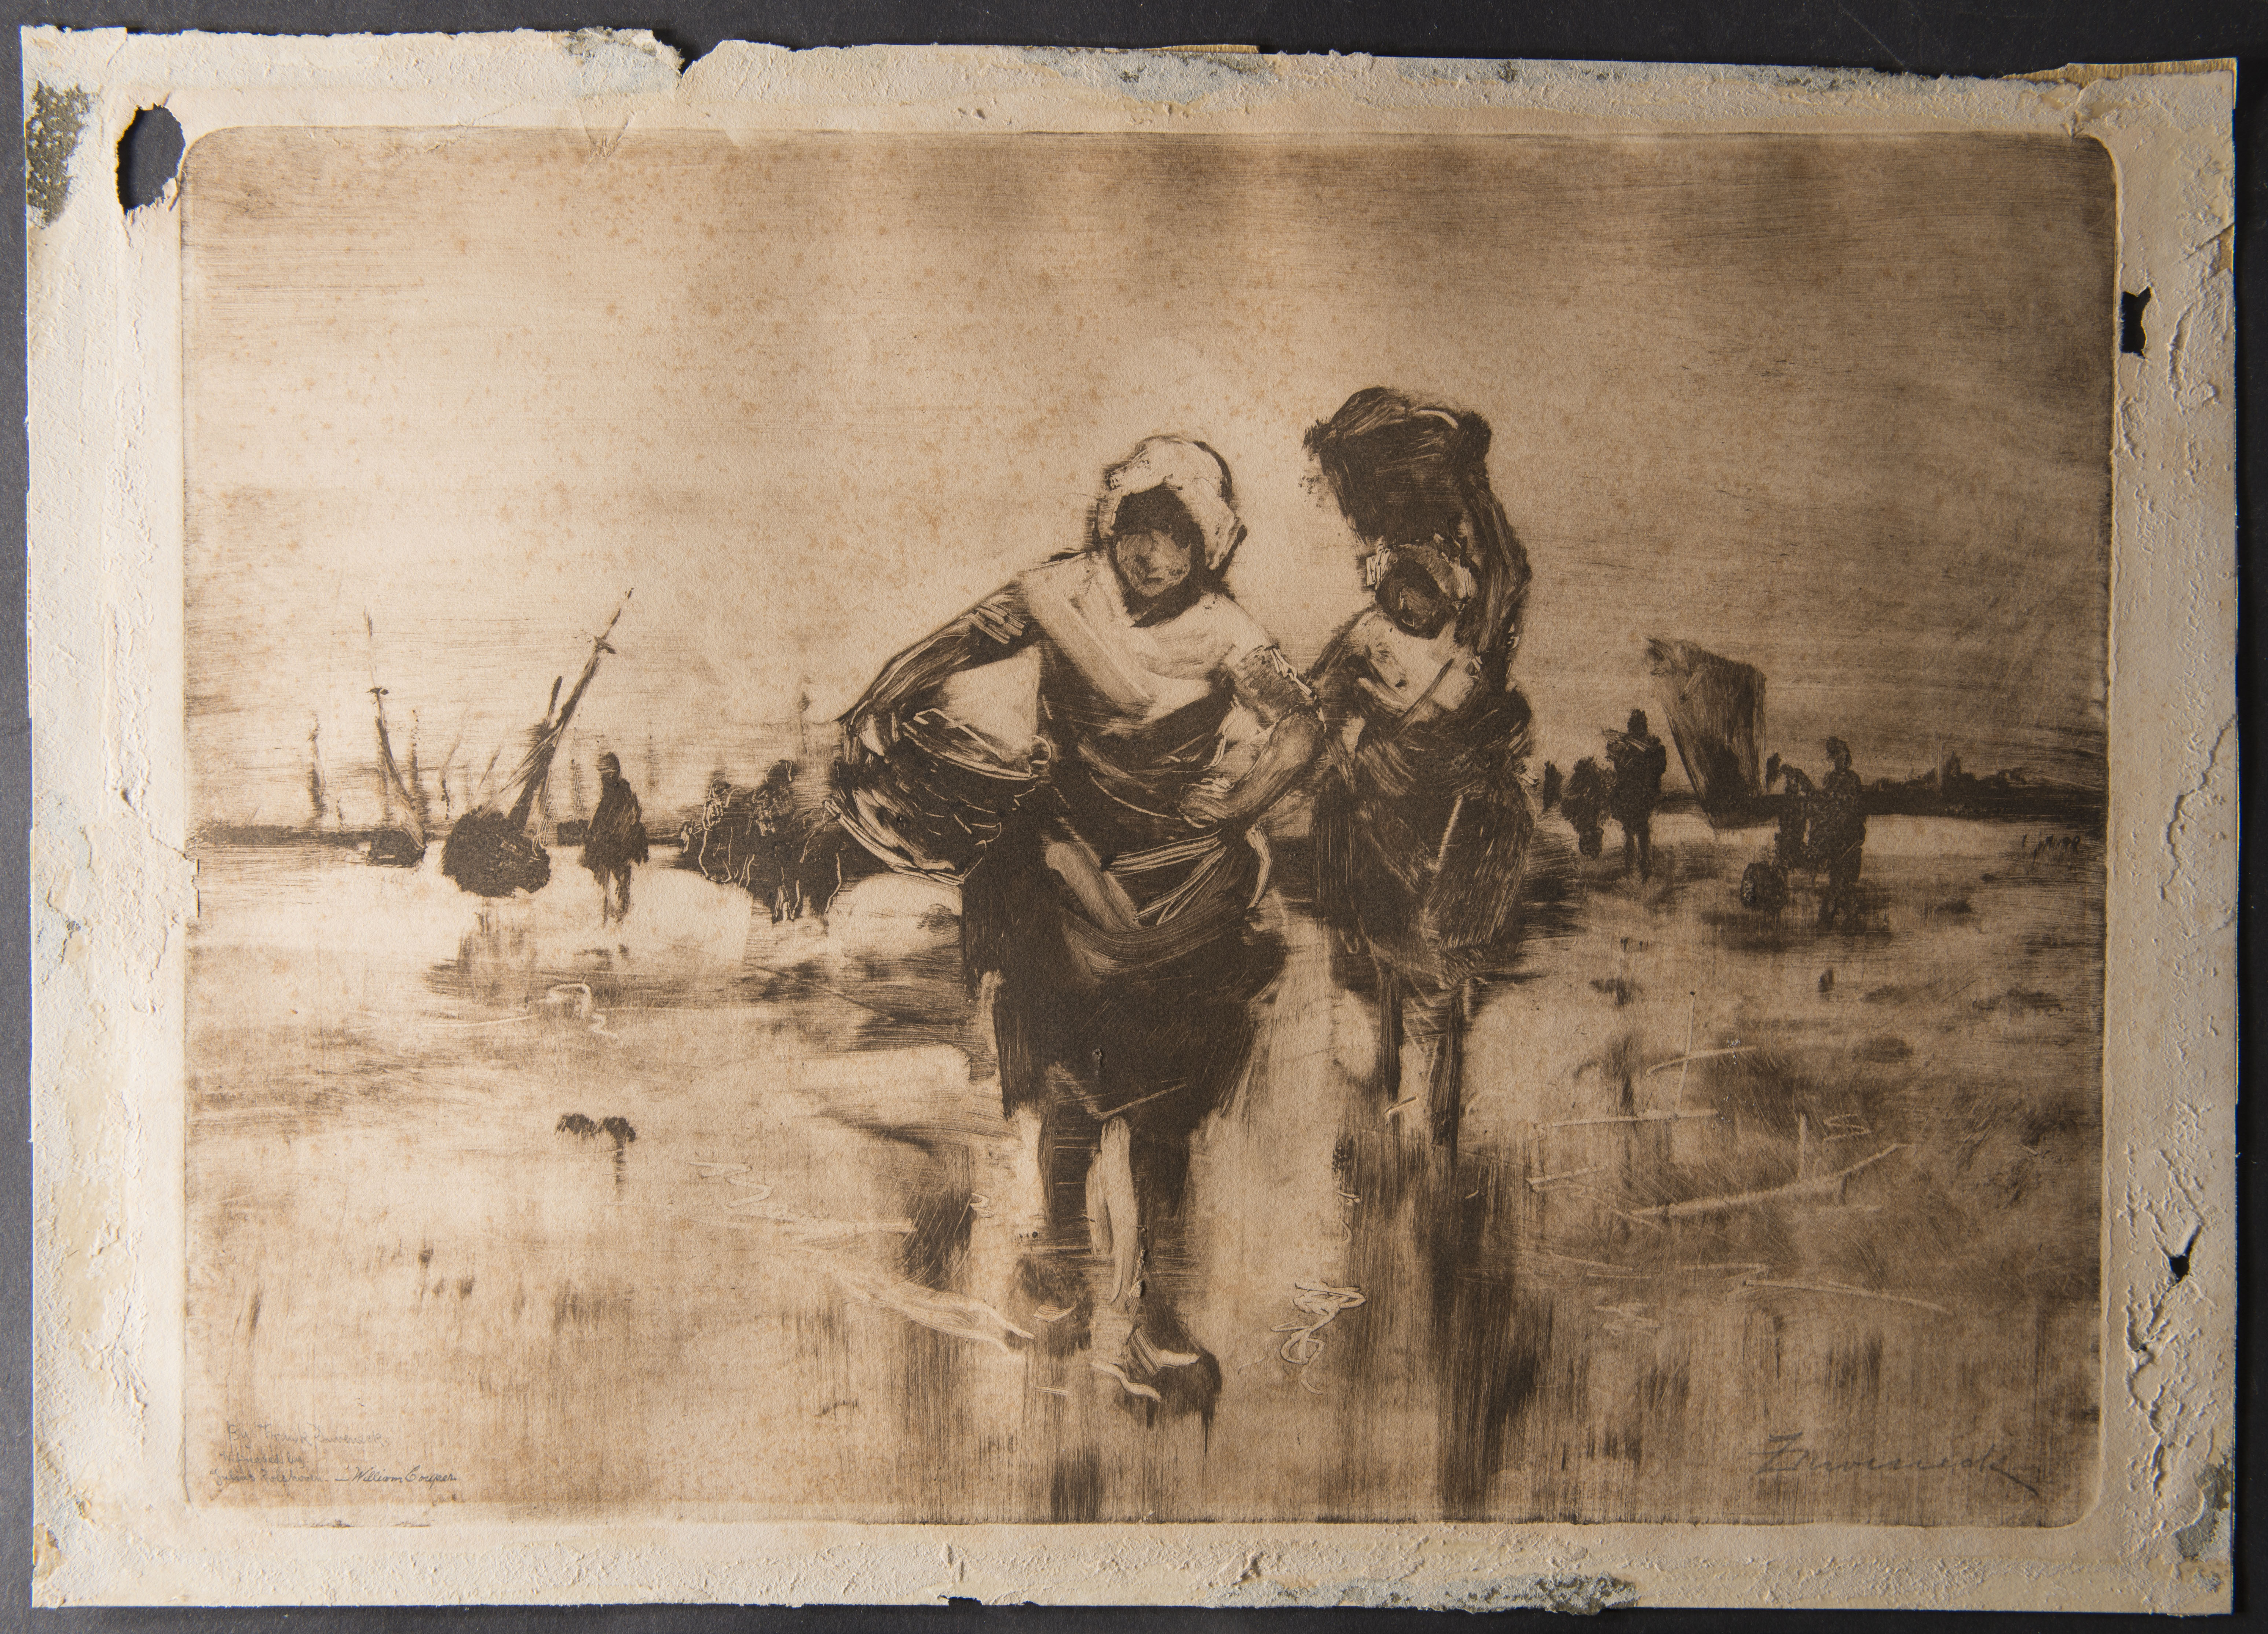 monochromatic illustration of women carrying baskets back to shore